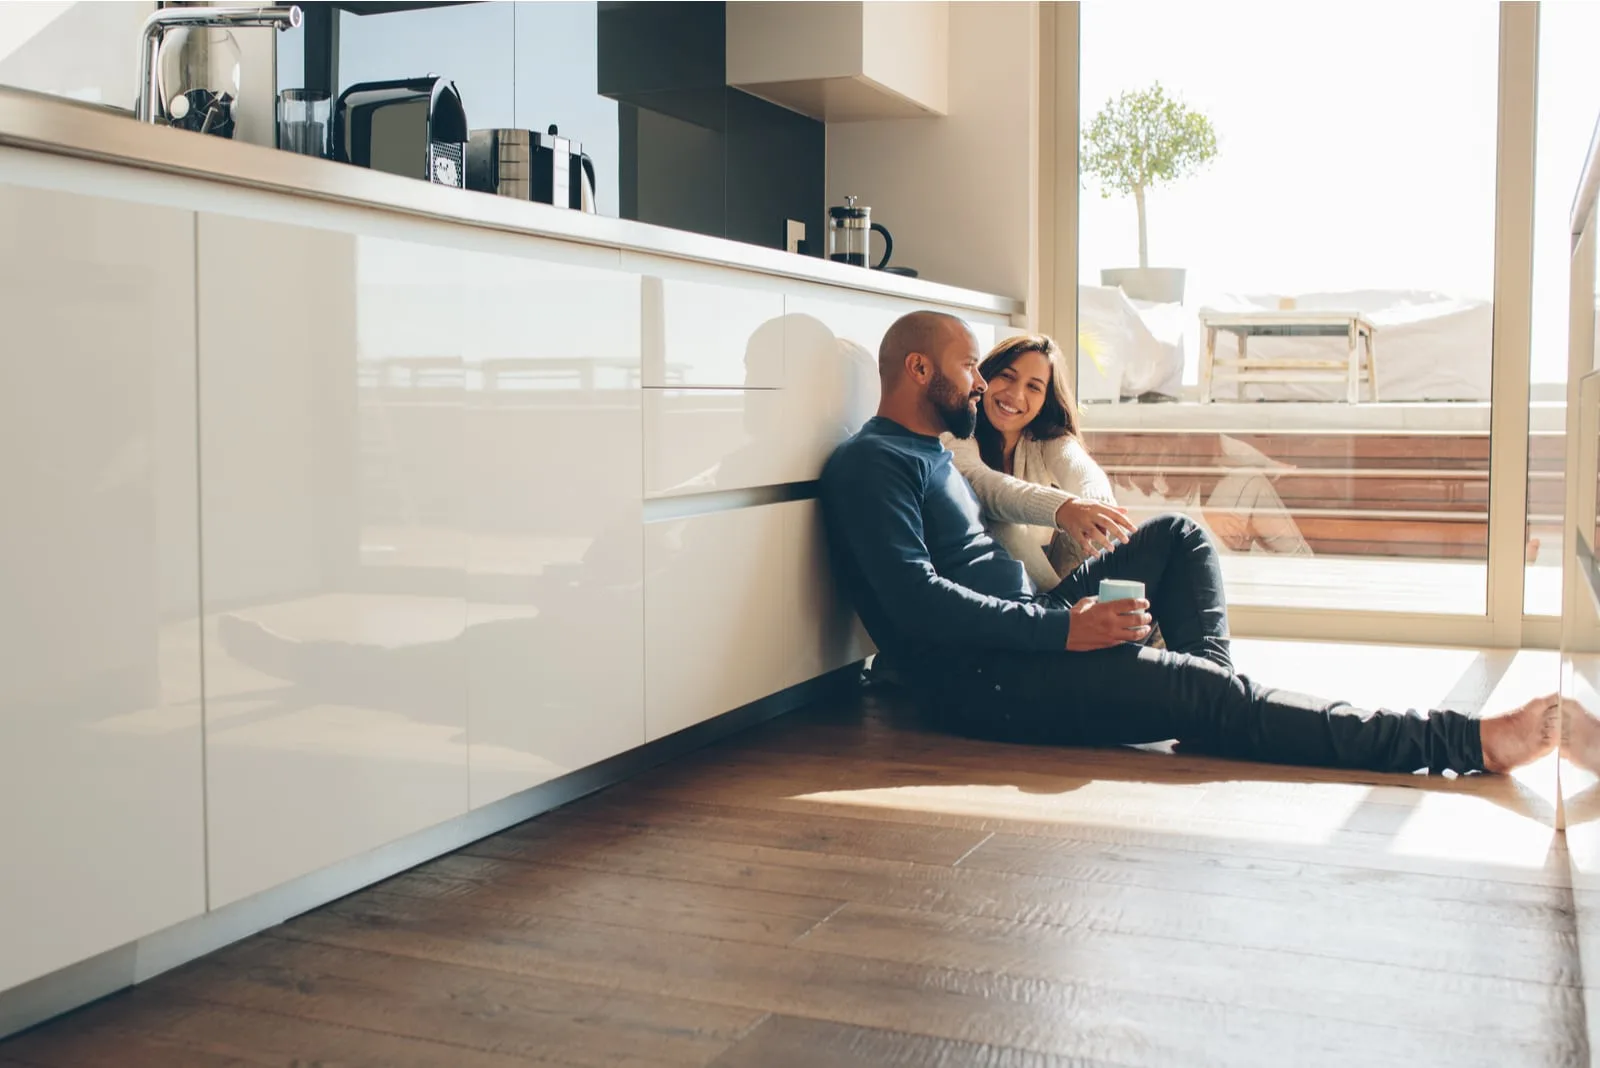  man and woman sitting on floor in kitchen and talking